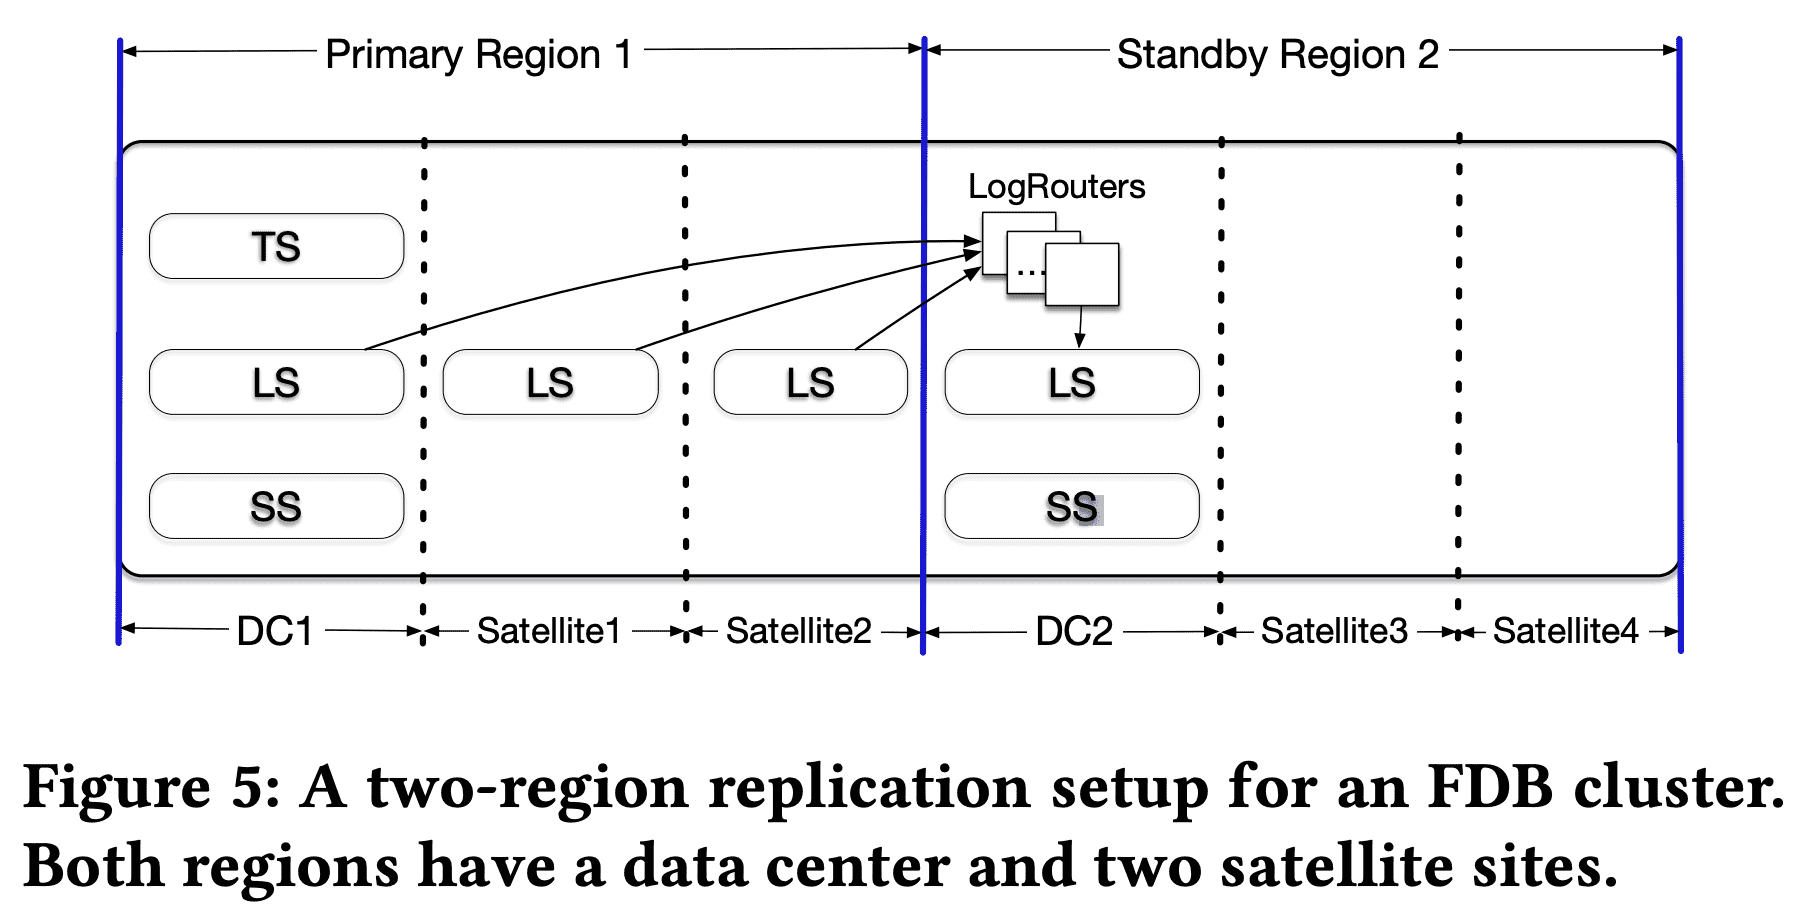 A two-region replication setup for an FDB cluster. Both regions have a data center and two satellite sites.